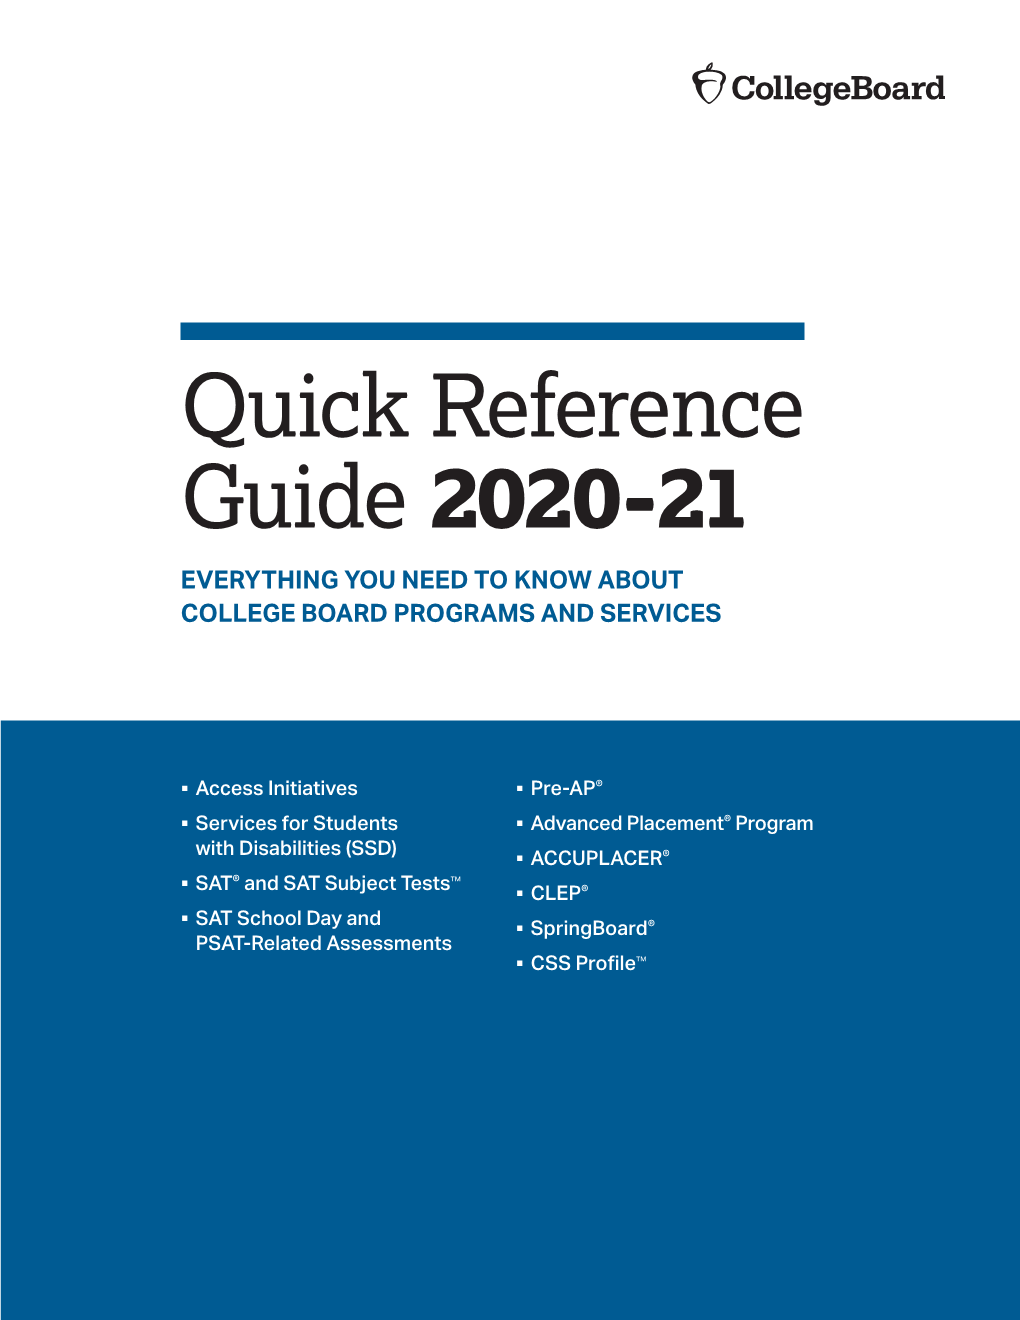 Quick Reference Guide 2020-21